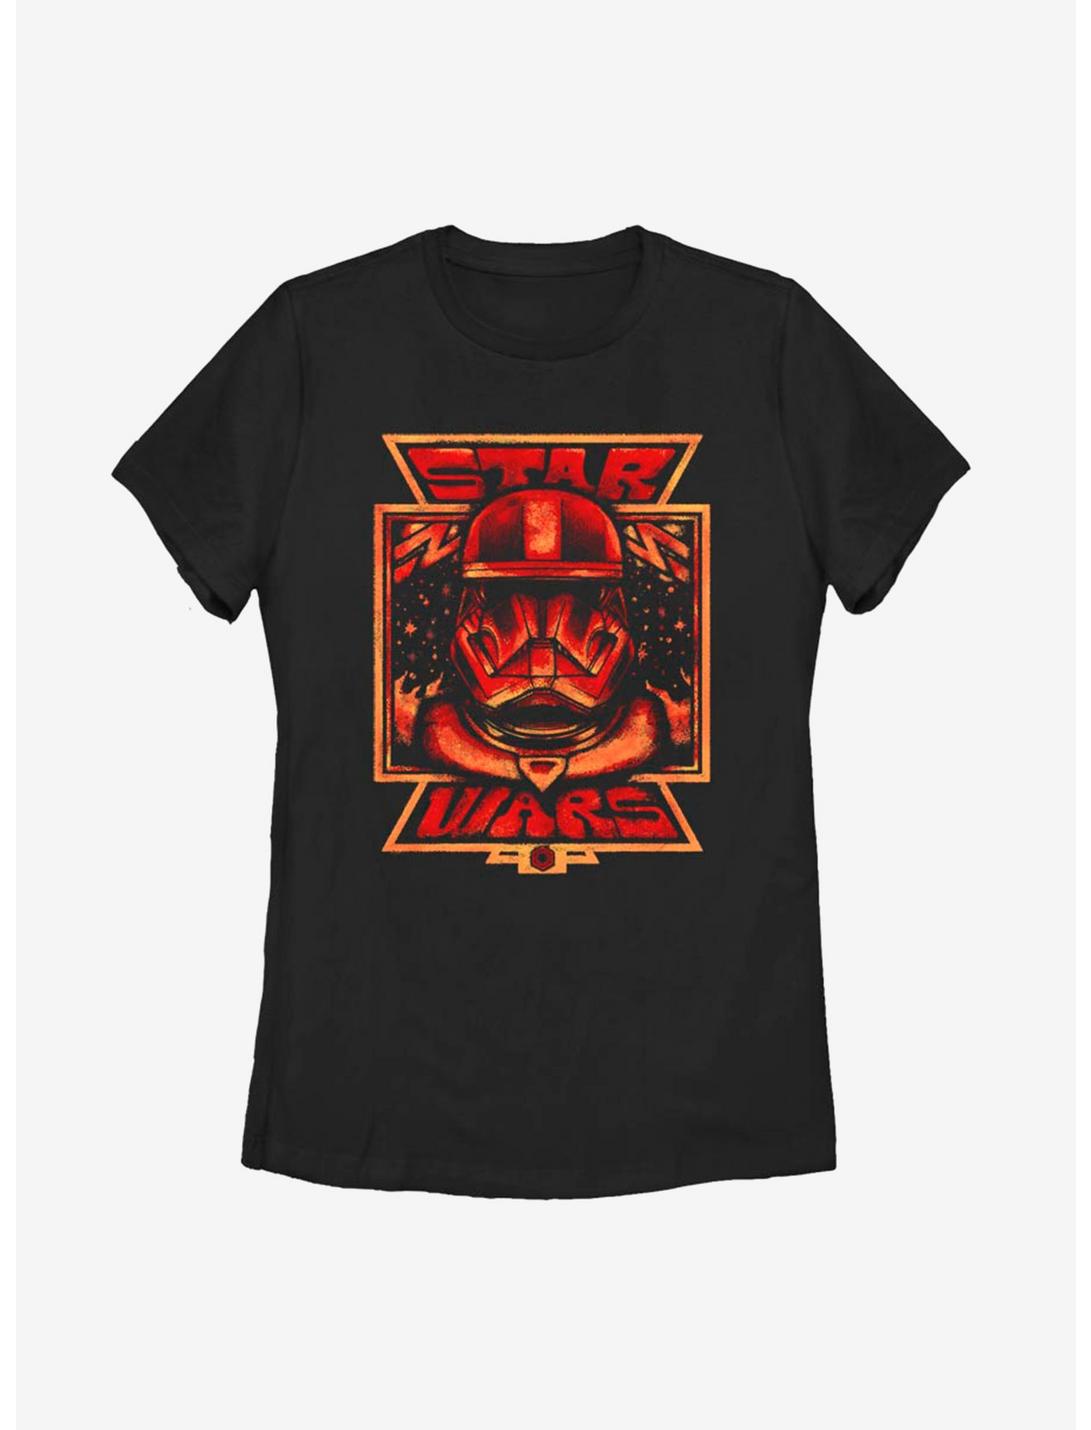 Star Wars Episode IX The Rise Of Skywalker Red Perspective Womens T-Shirt, BLACK, hi-res